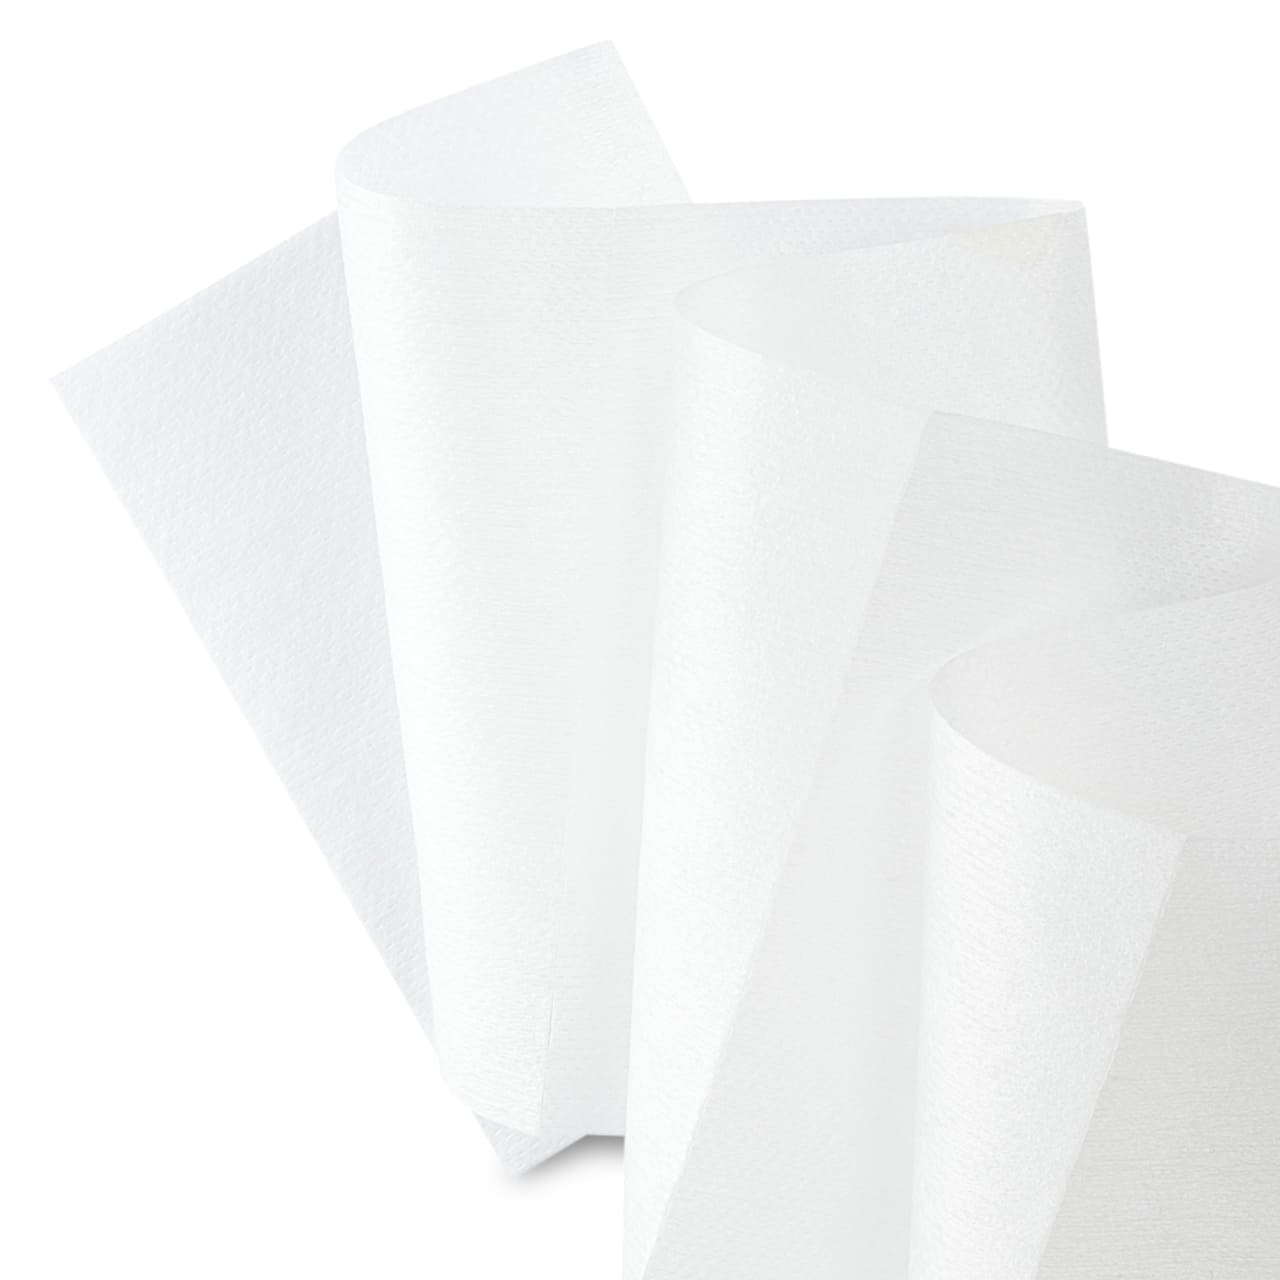 WypAll® Wettask™ Low Lint Wipes for Solvents